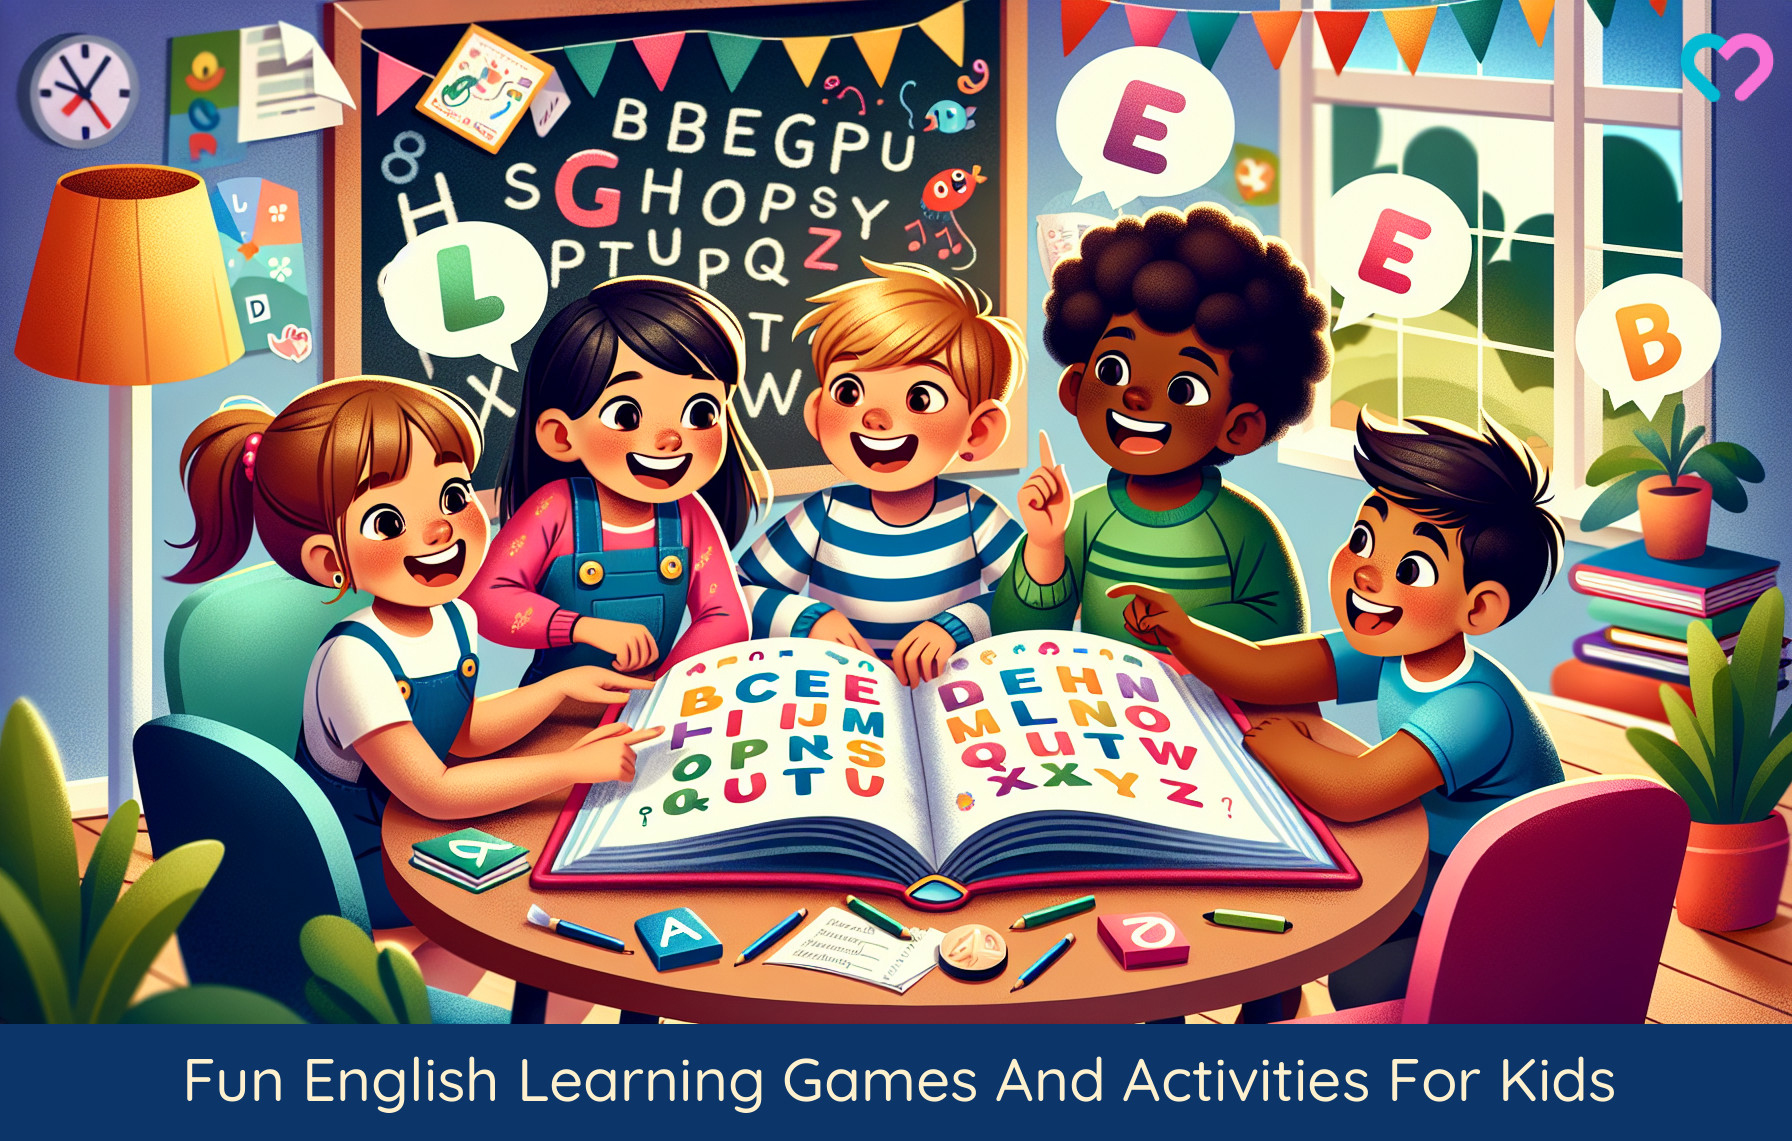 English Learning Games For Kinds_illustration